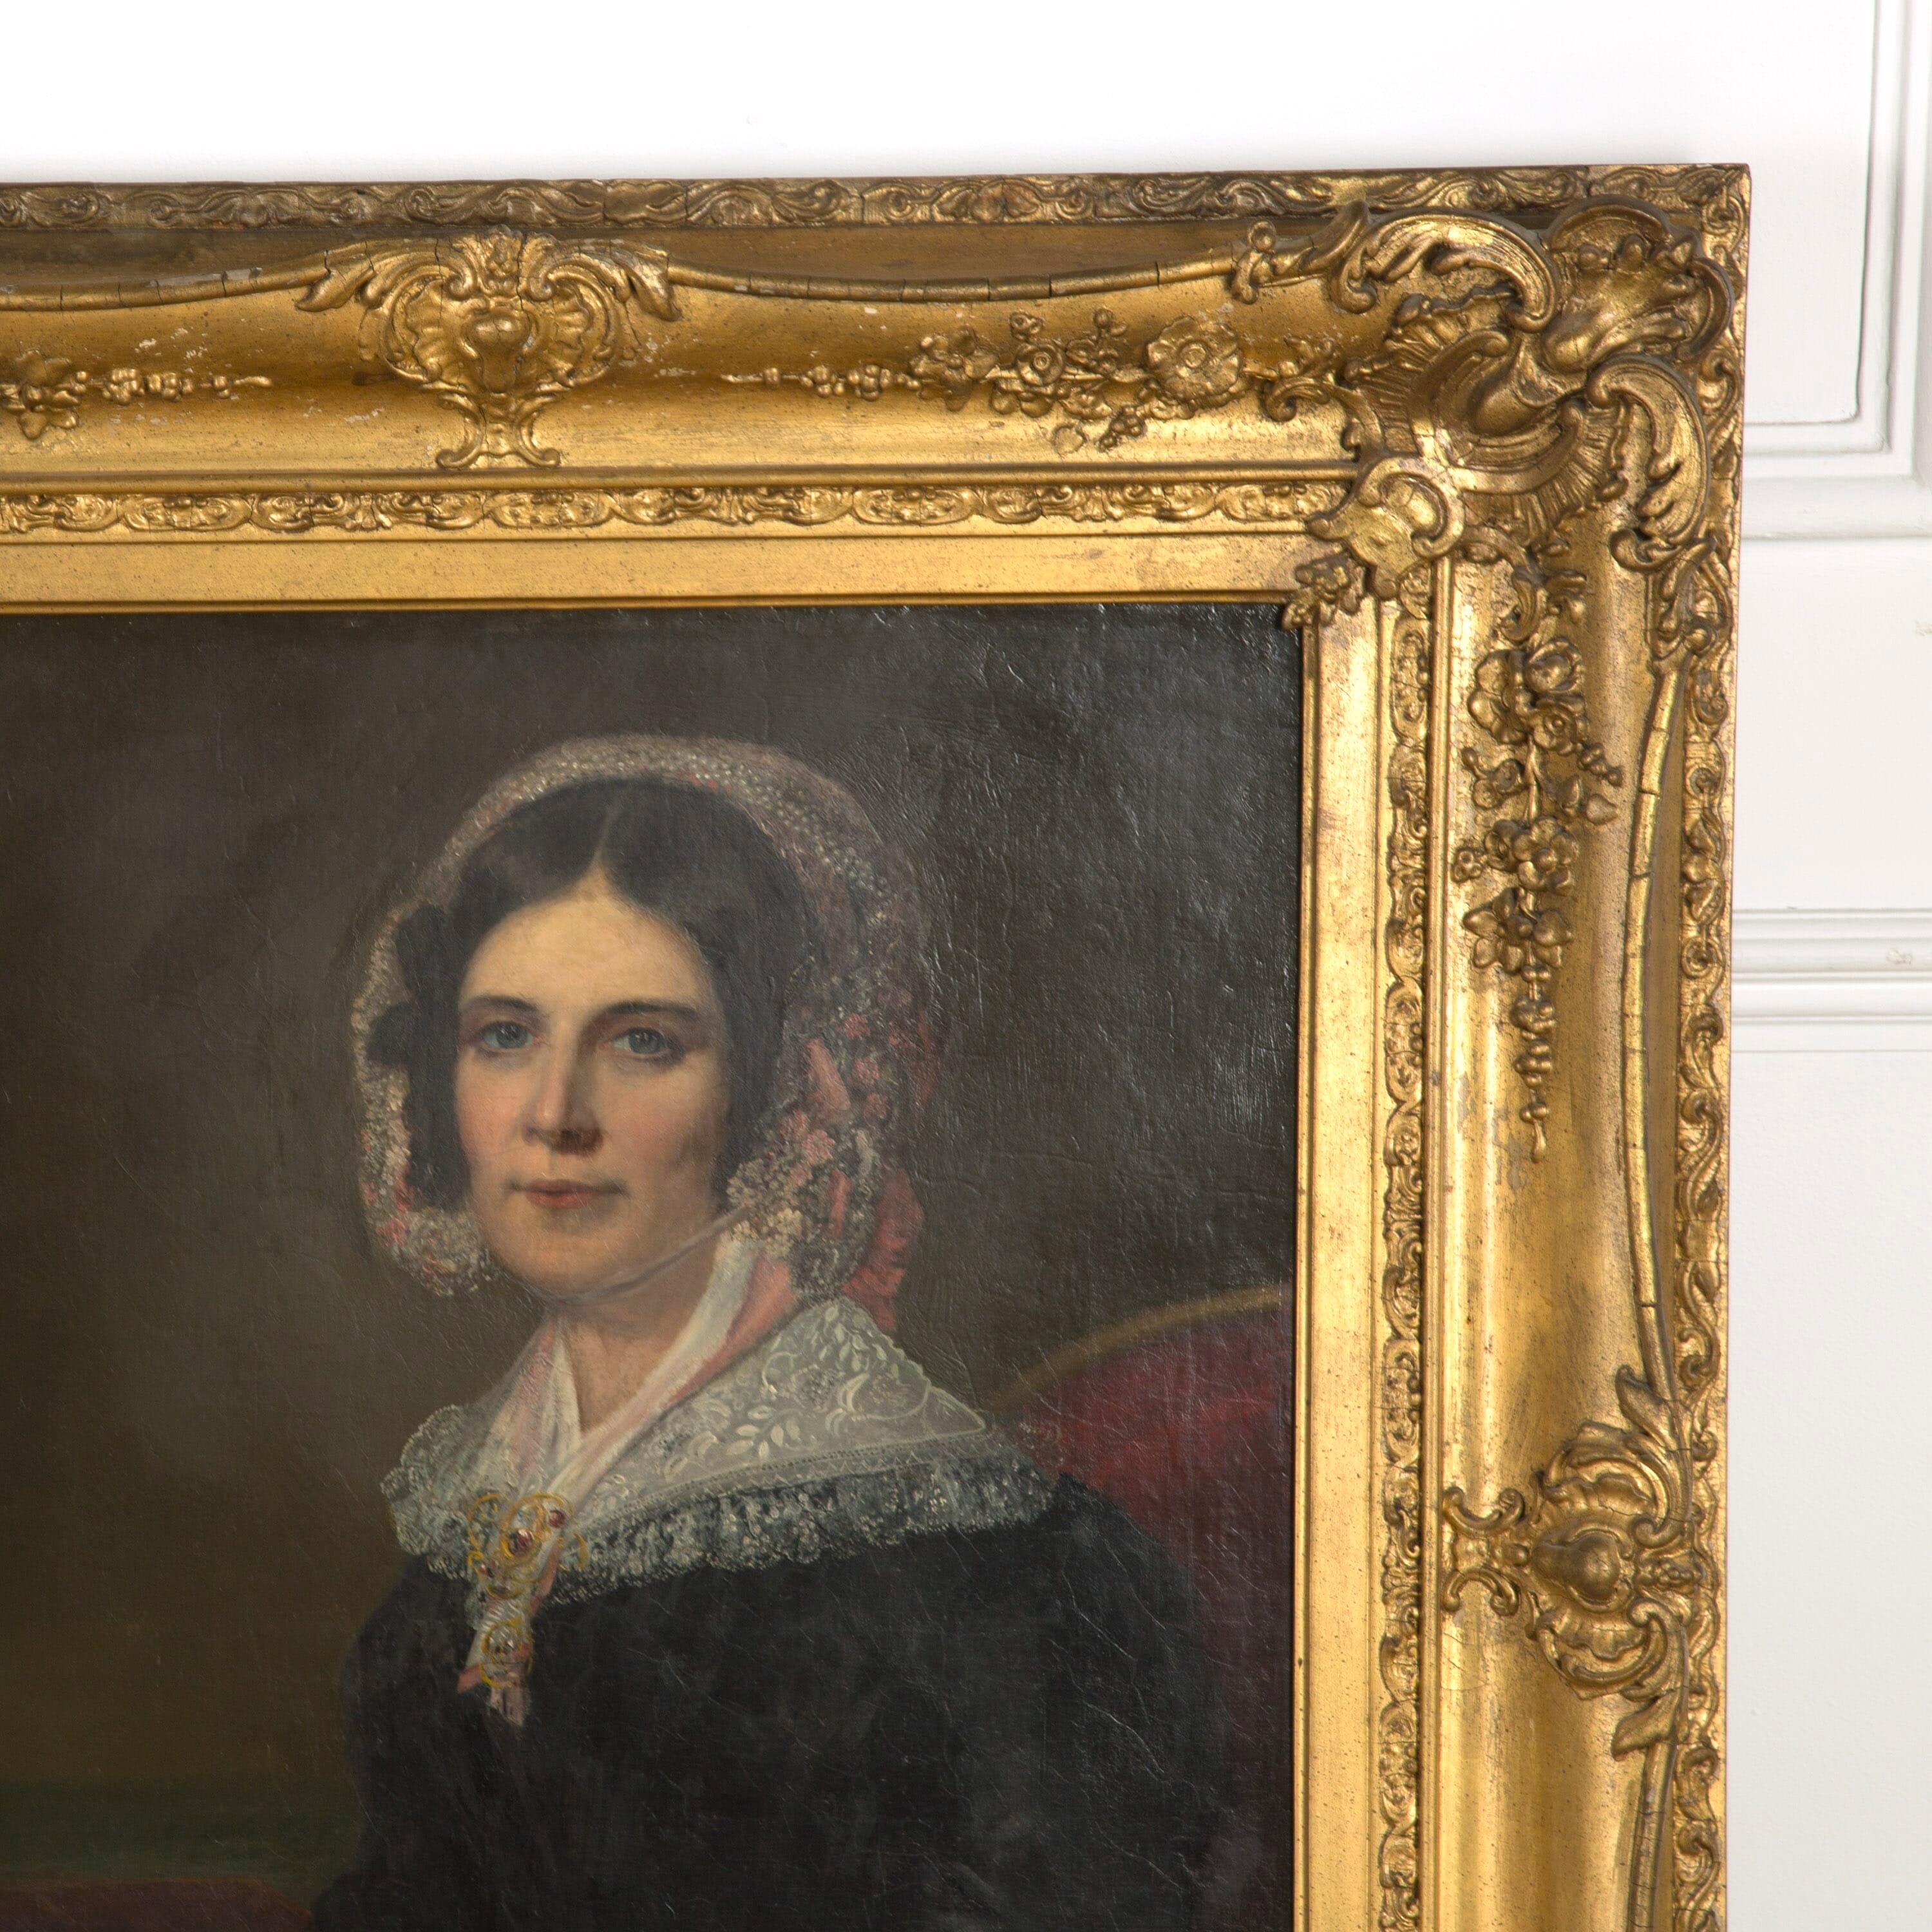 Pair of early 19th century Victorian oil on canvas portrait paintings depicting an aristocratic lady and her husband.

The lady is believed to be Sarah Lowe and the gentleman believed to be Isaac Lowe. They both wear black dress, she with white